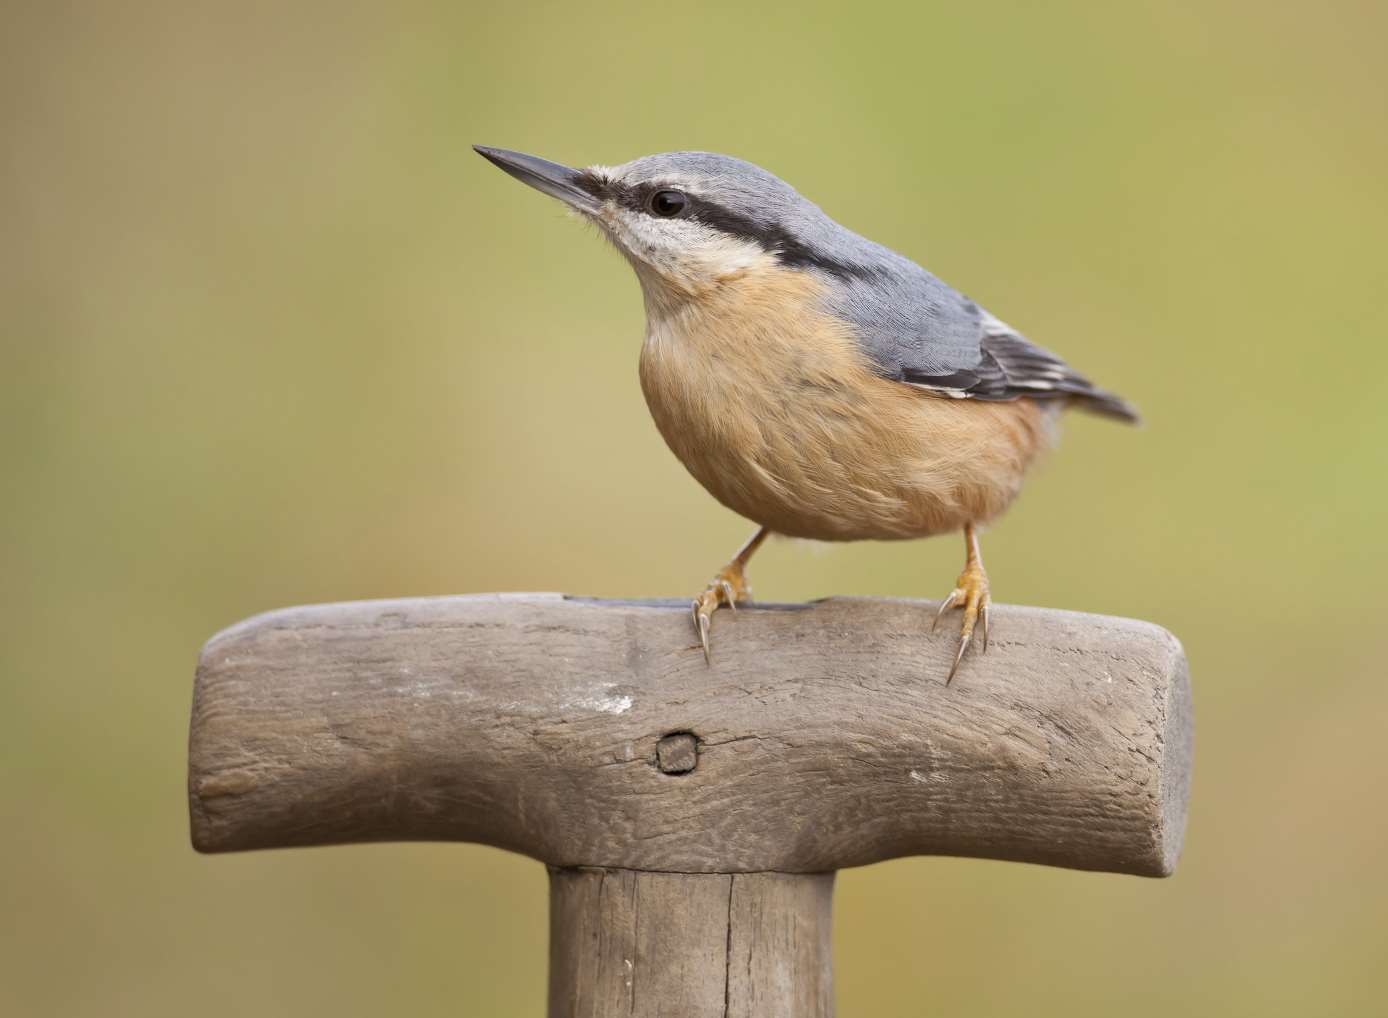 Keep your eyes peeled for a nuthatch